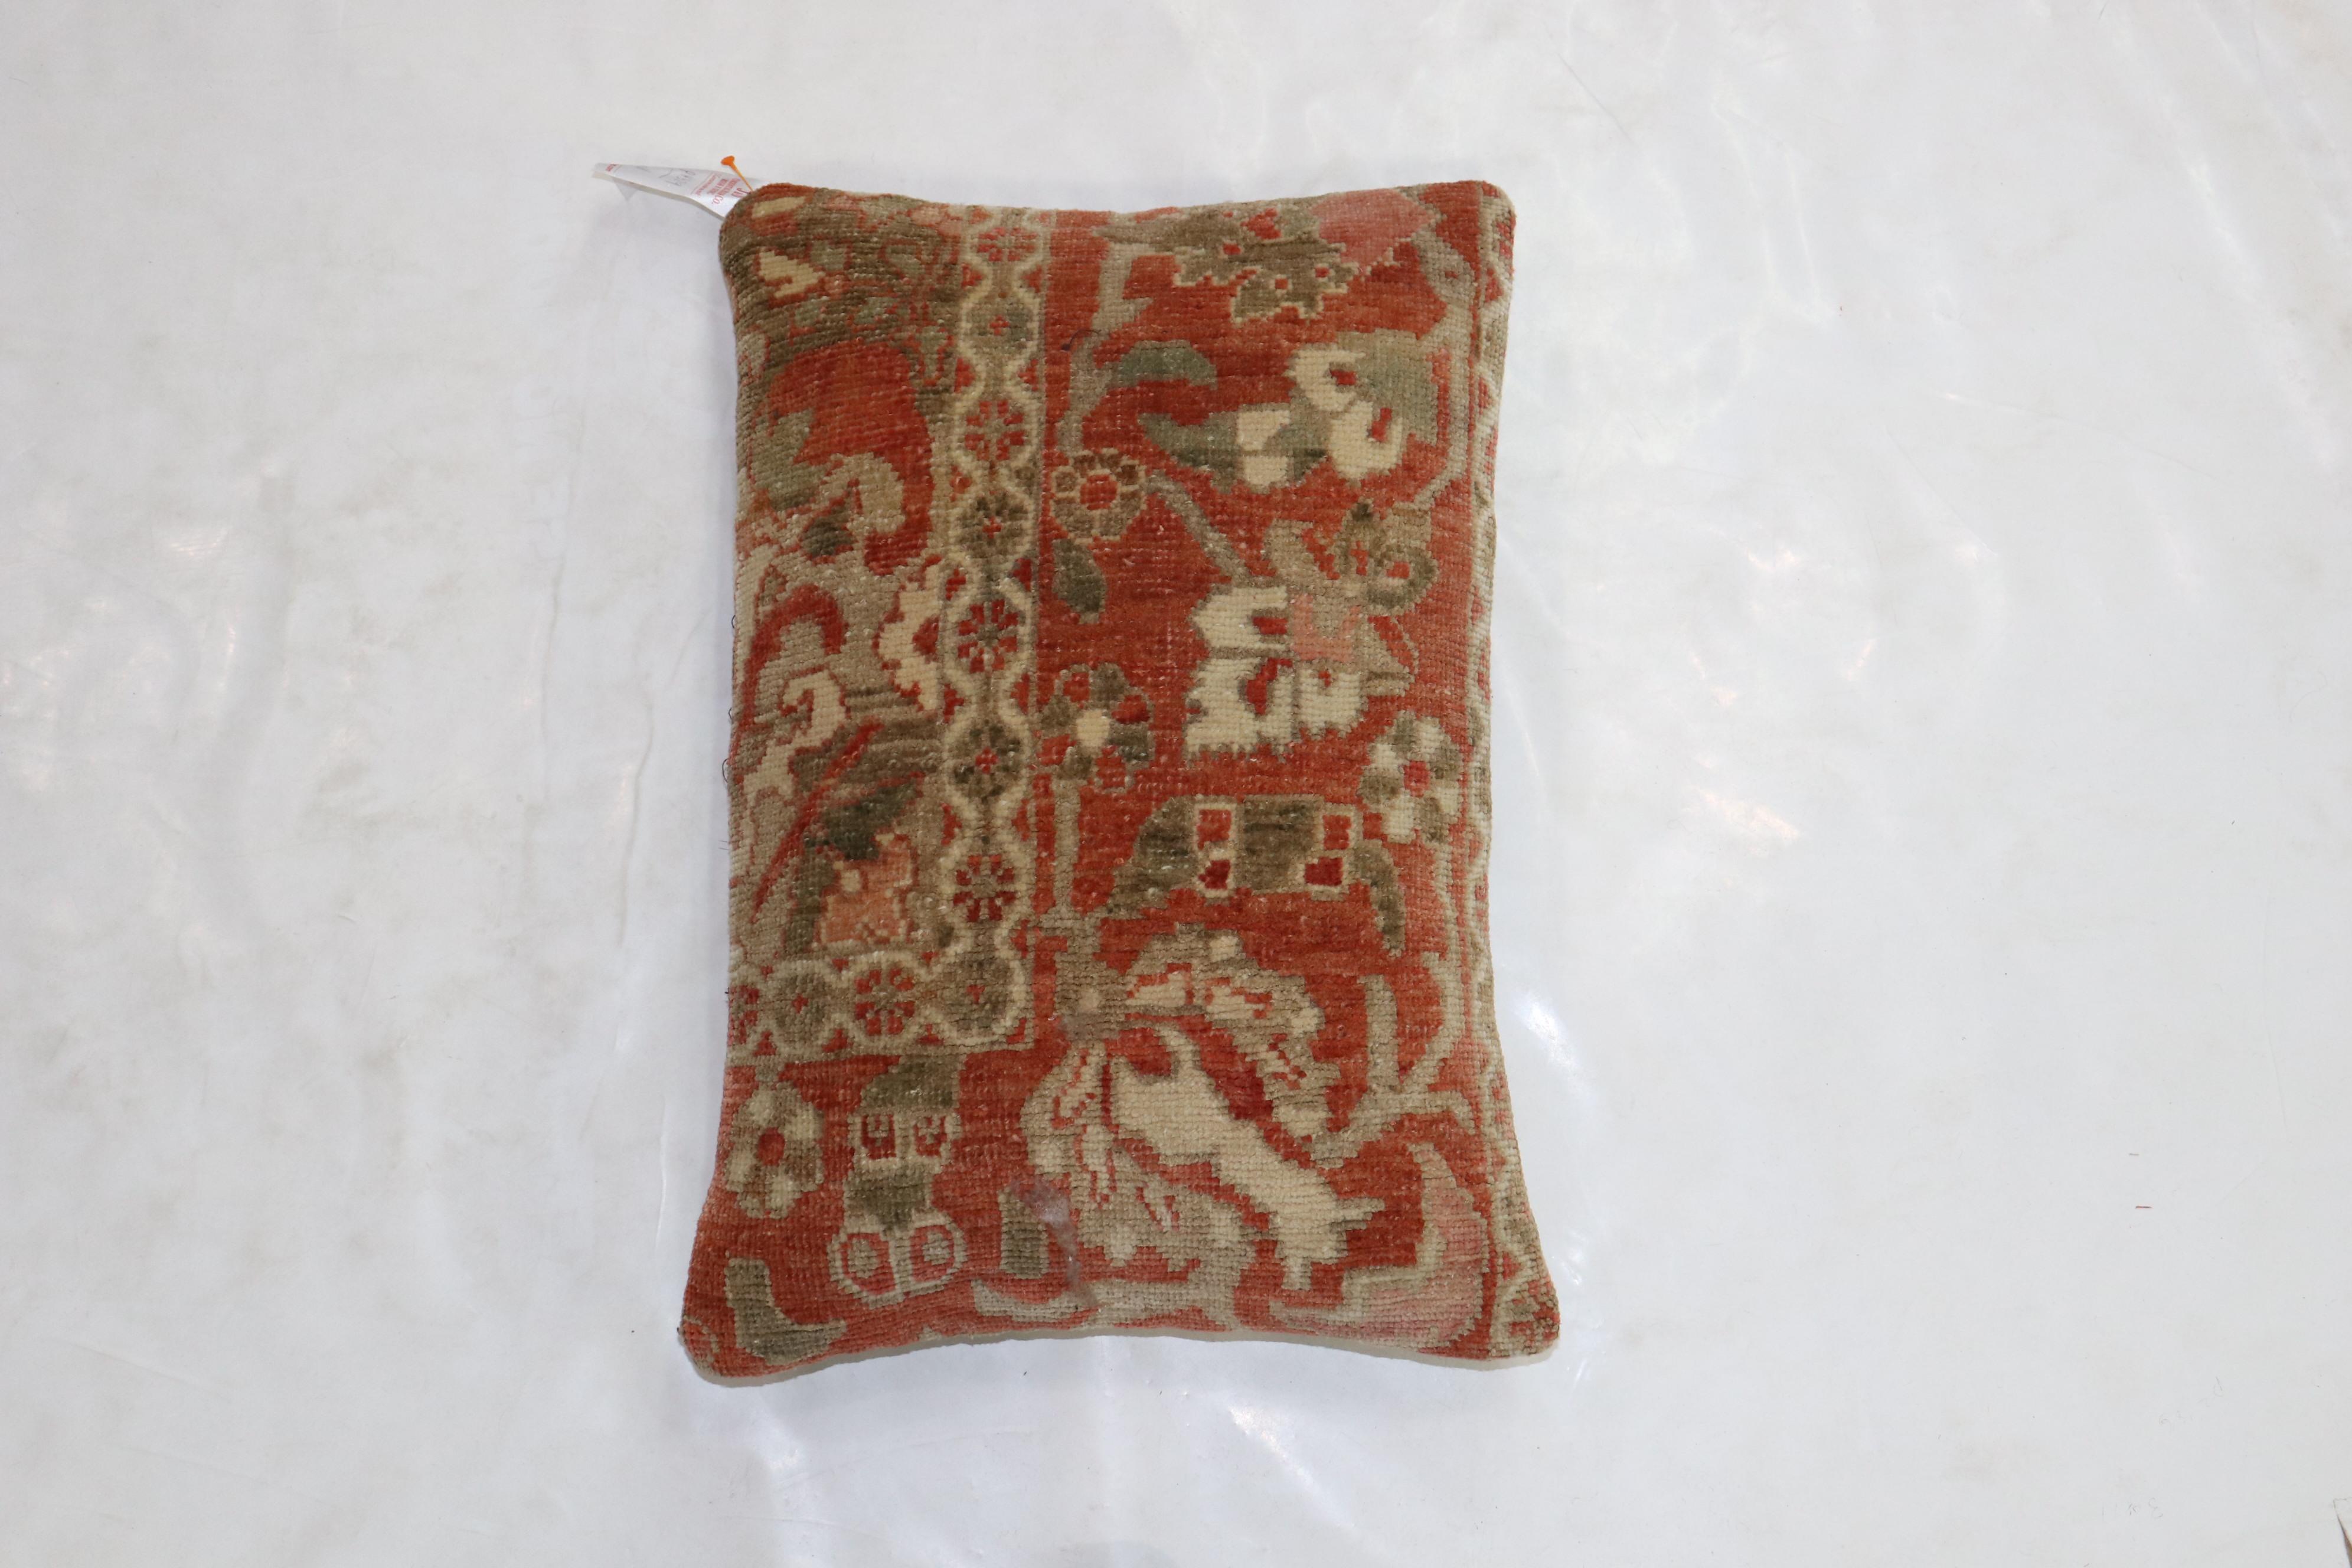 Pillow made from a Persian a Malayer rug. Terracotta, brown and ivory accents

Measures: 16